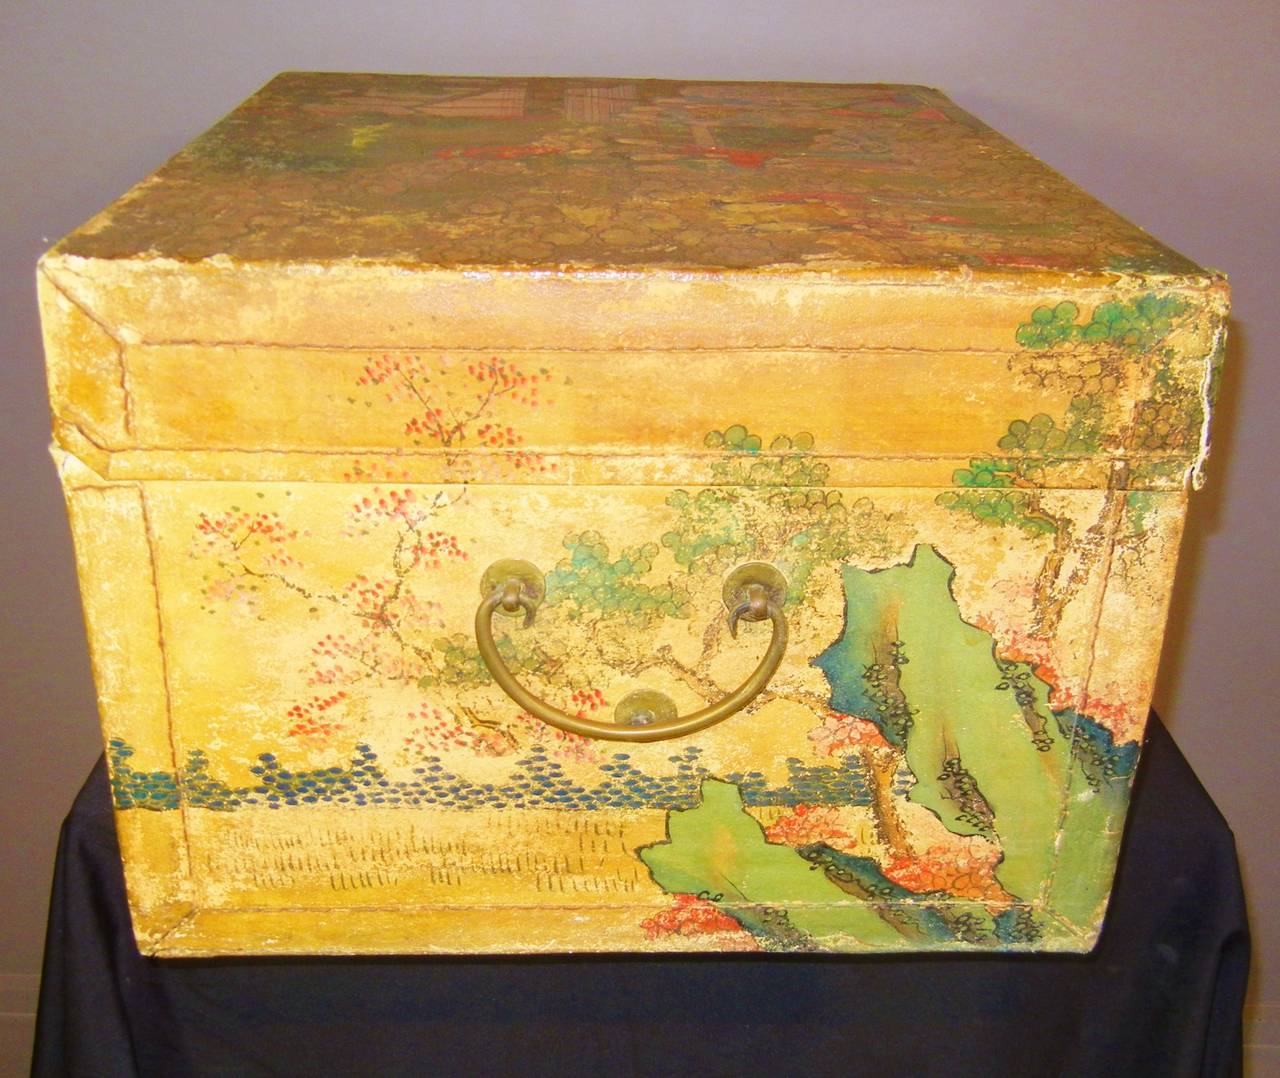 Dyed Pigskin Lady's Trunk with Painted Vignettes and Silk Lining, China, 1885